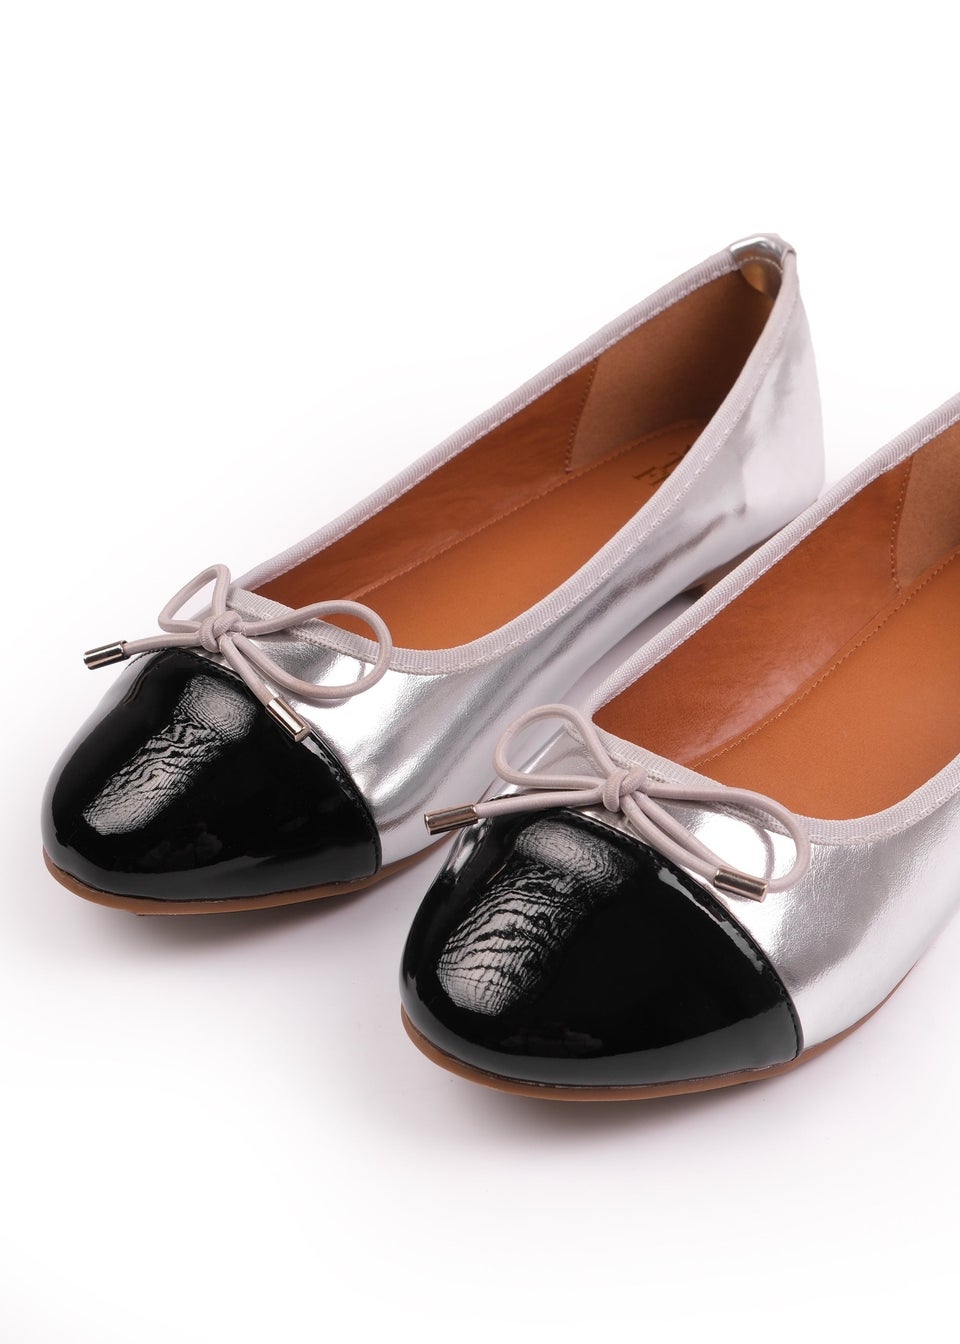 Where's That From Silver Janice Ballerina Flats With Bow Detail